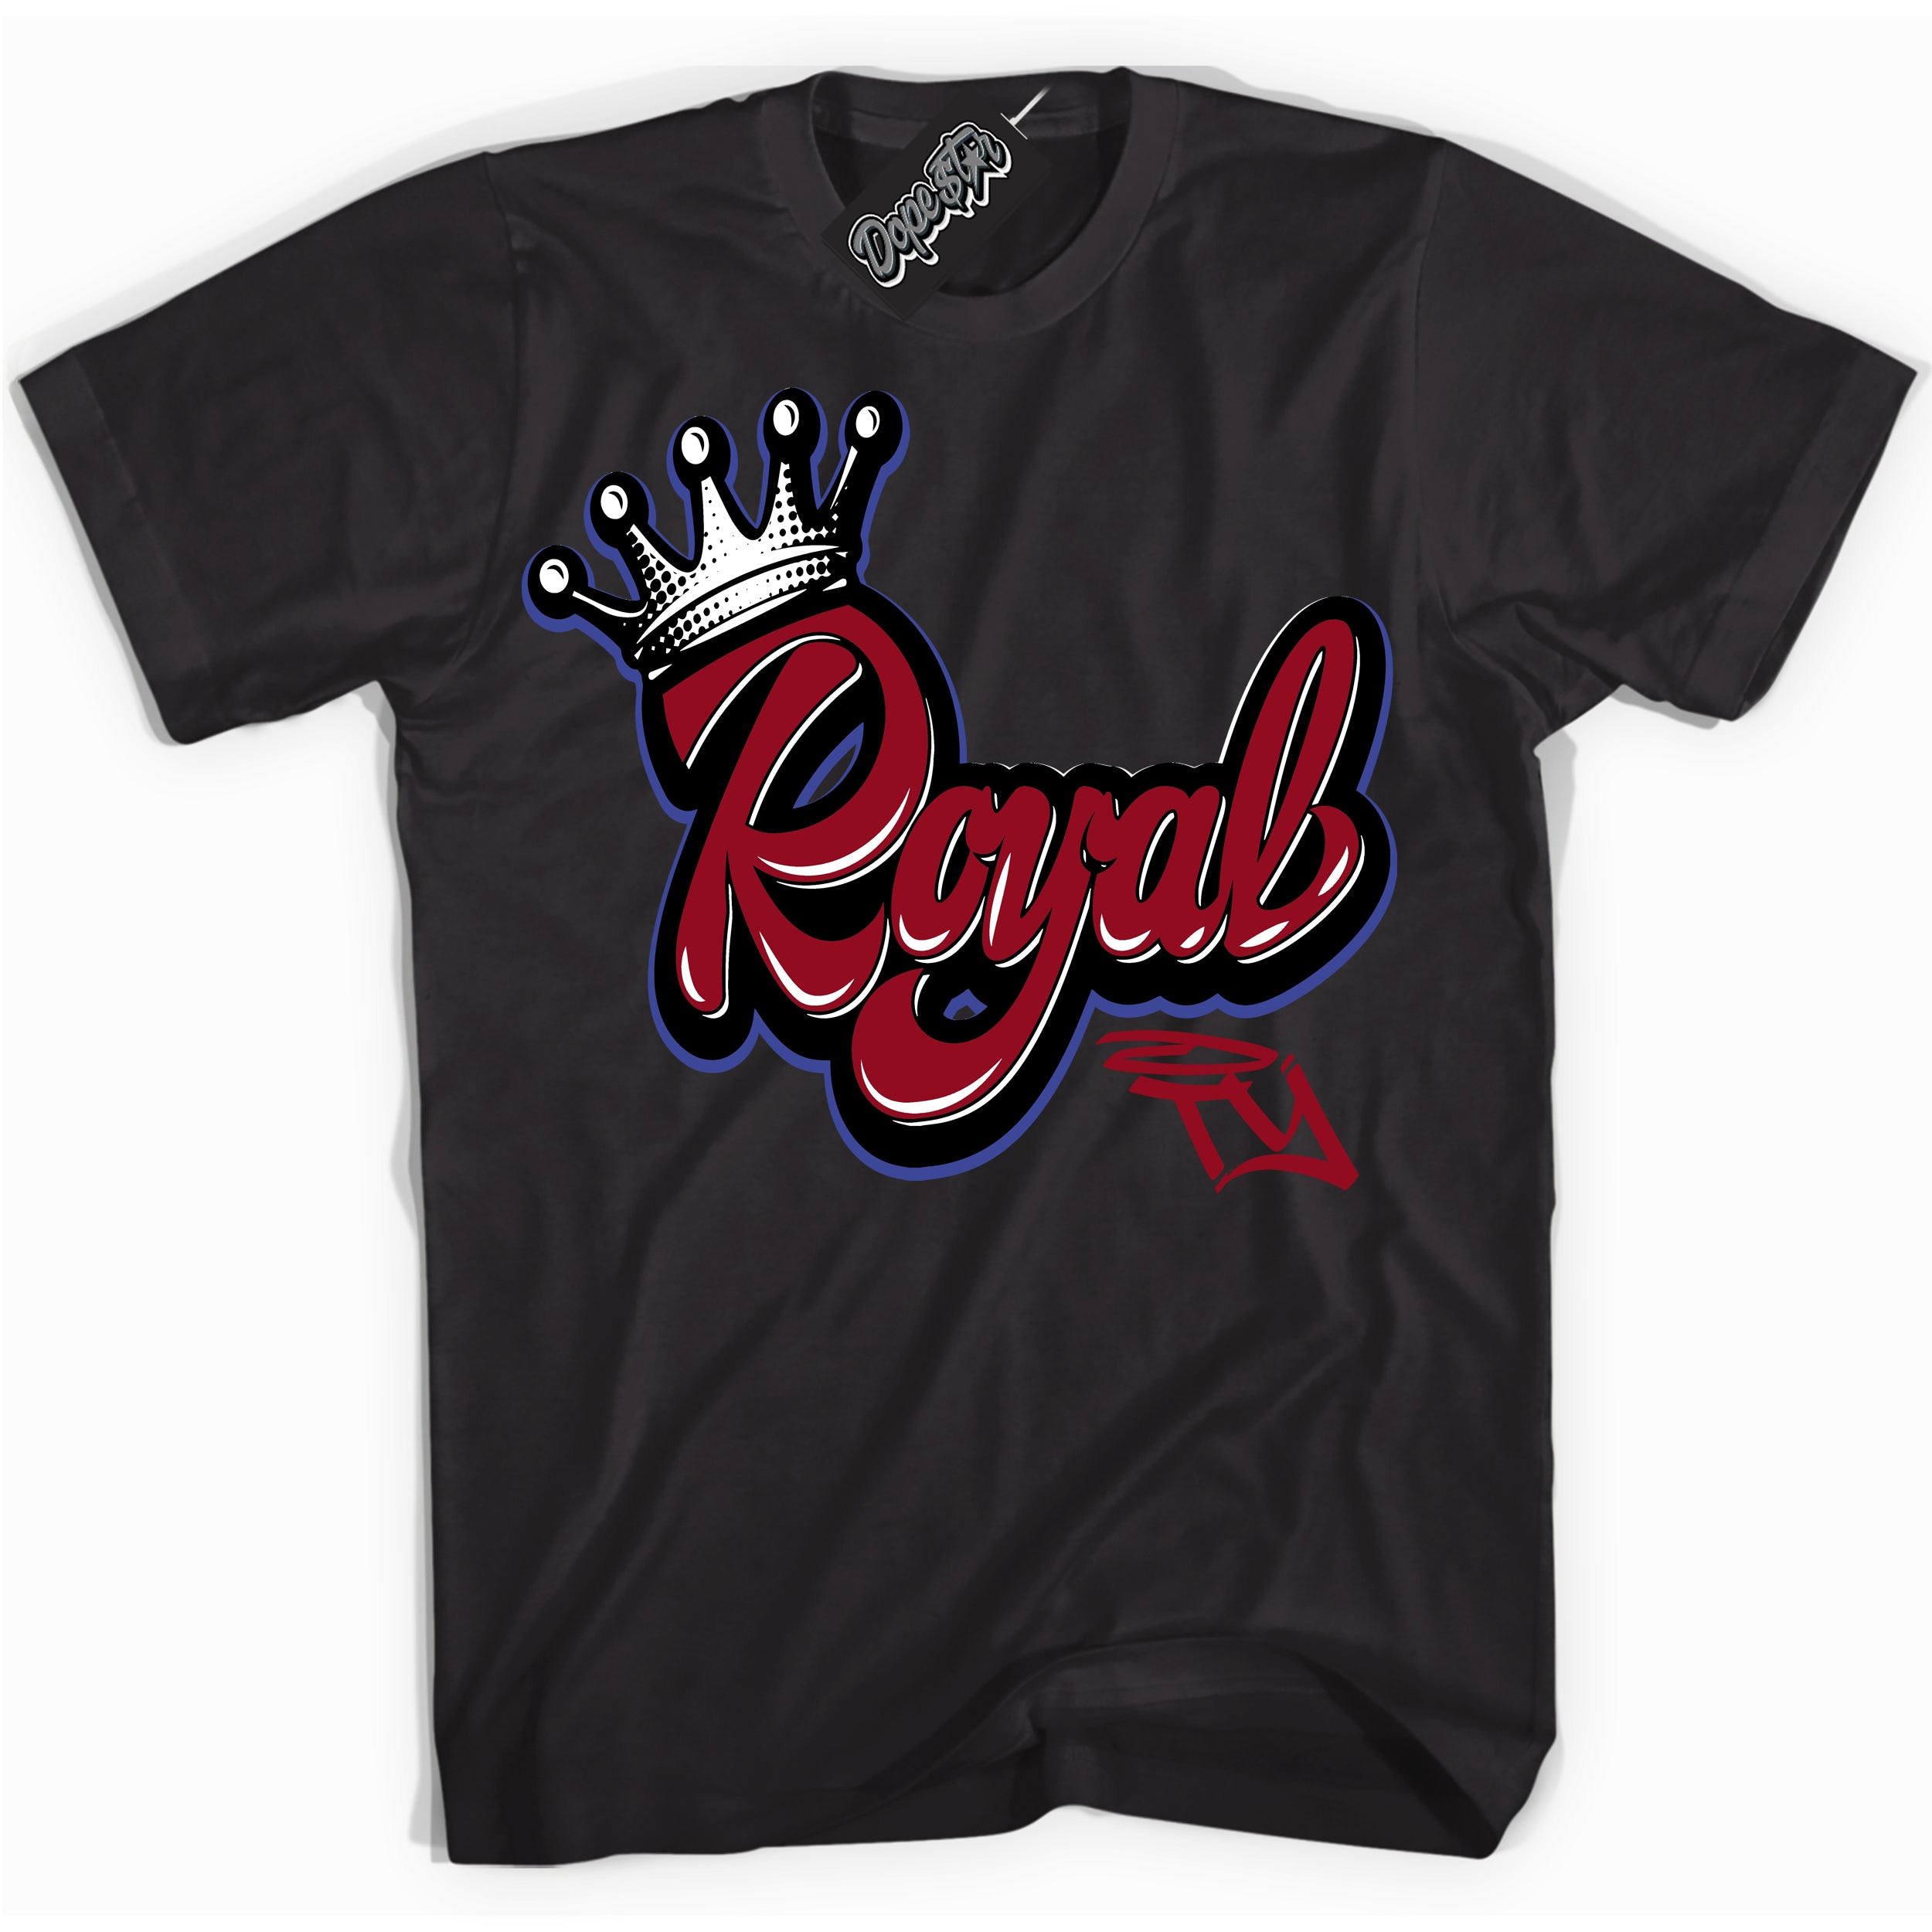 Cool Black Shirt with “ Royalty ” design that perfectly matches Playoffs 8s Sneakers.